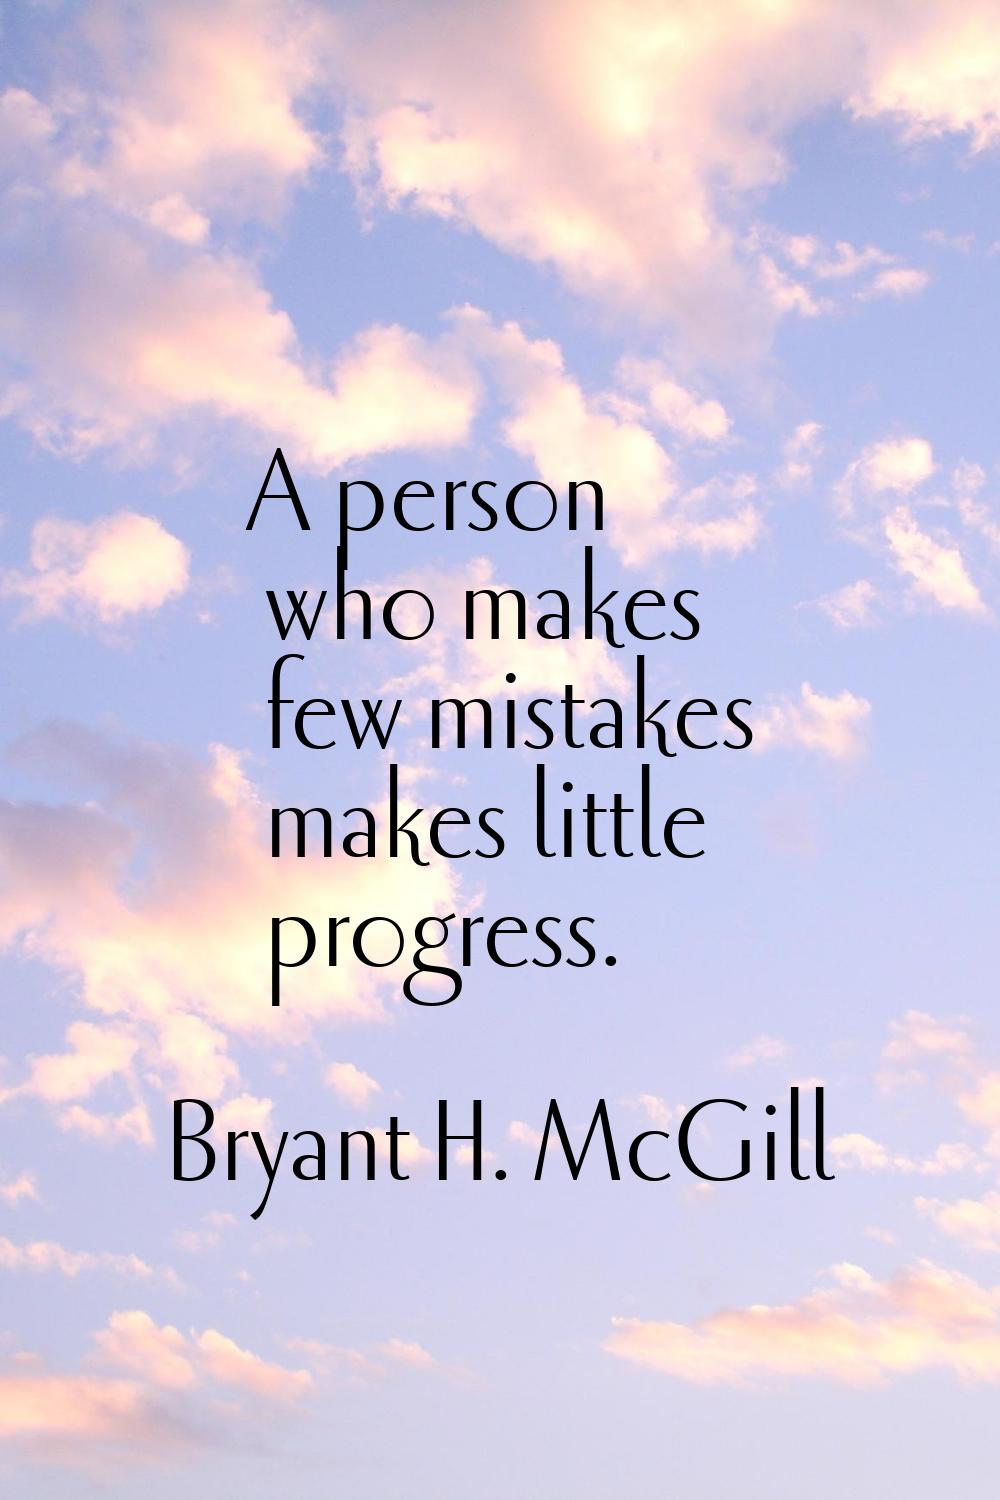 A person who makes few mistakes makes little progress.